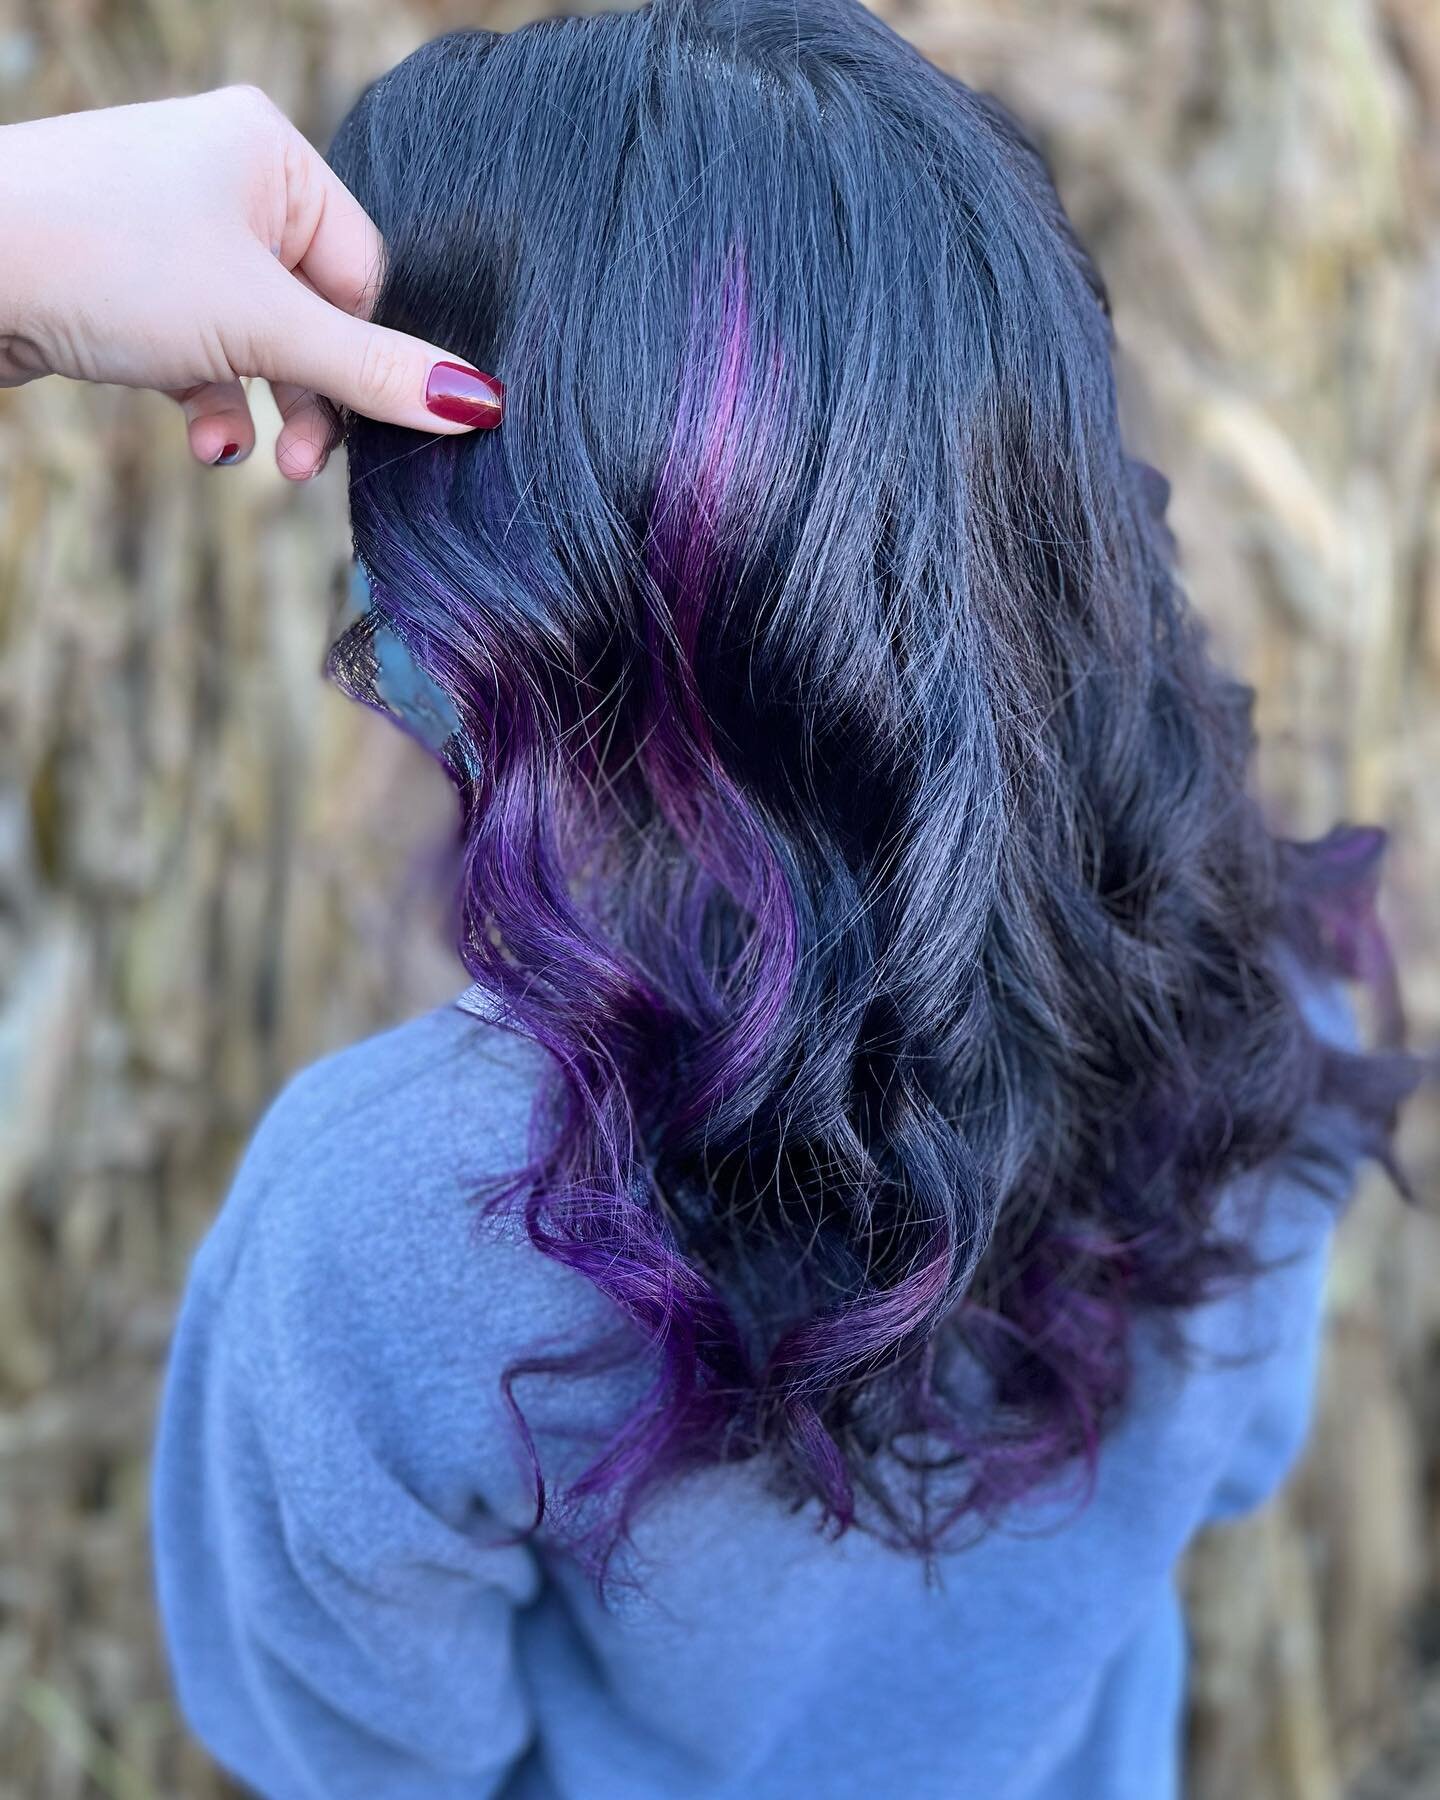 How beautiful is this purple we did in her hair!!!!
@sillistyles @coric6 @purple_mask0245 #purplebalayage #stlhairstylist #stlcolorist #southcountysalon #314colorist